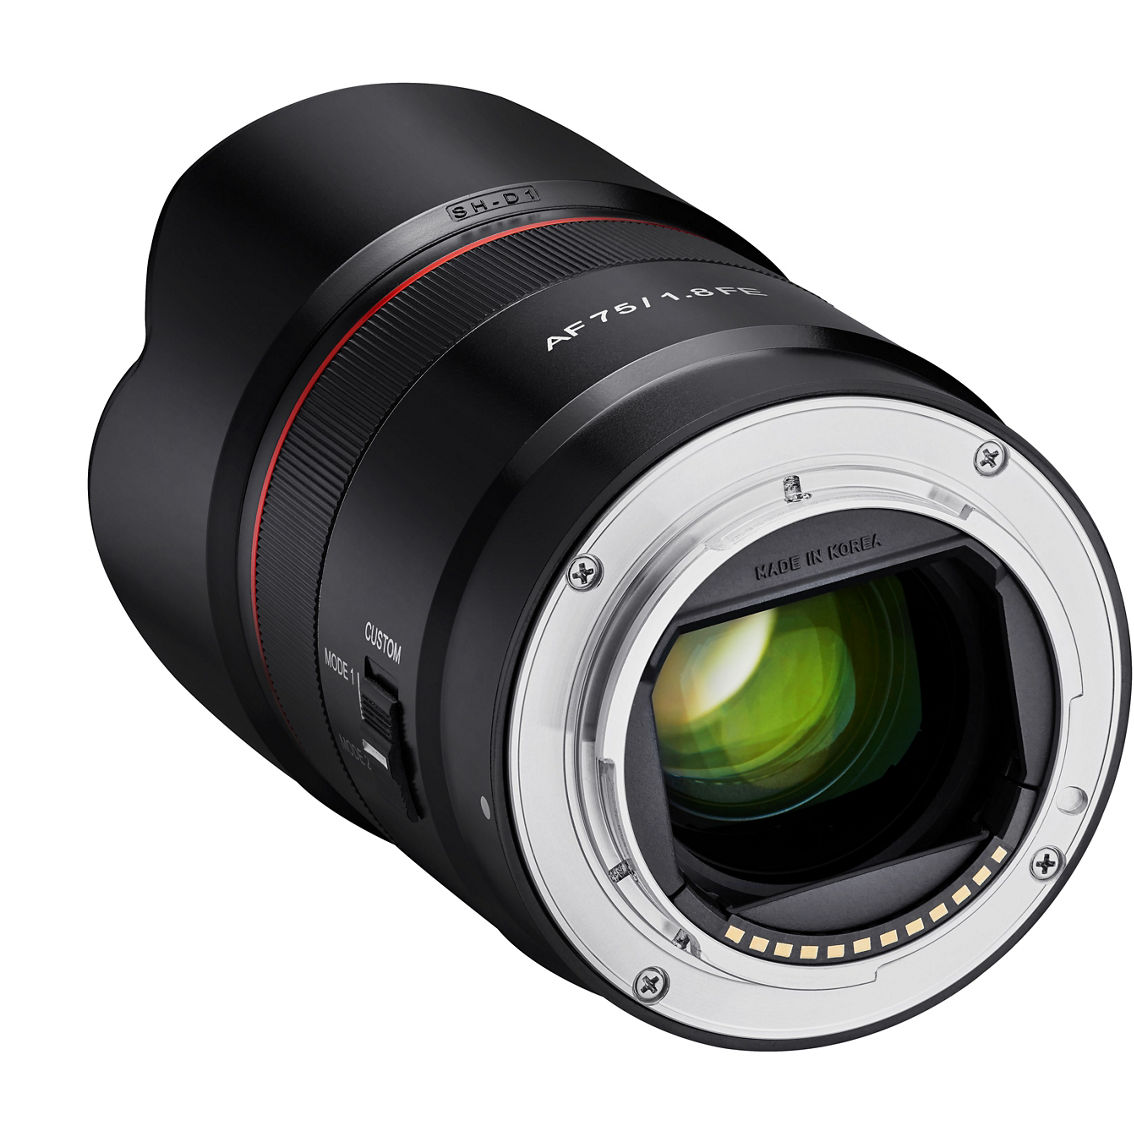 Rokinon 75mm F1.8 AF Compact Telephoto Lens for Sony E Mount - Image 5 of 5